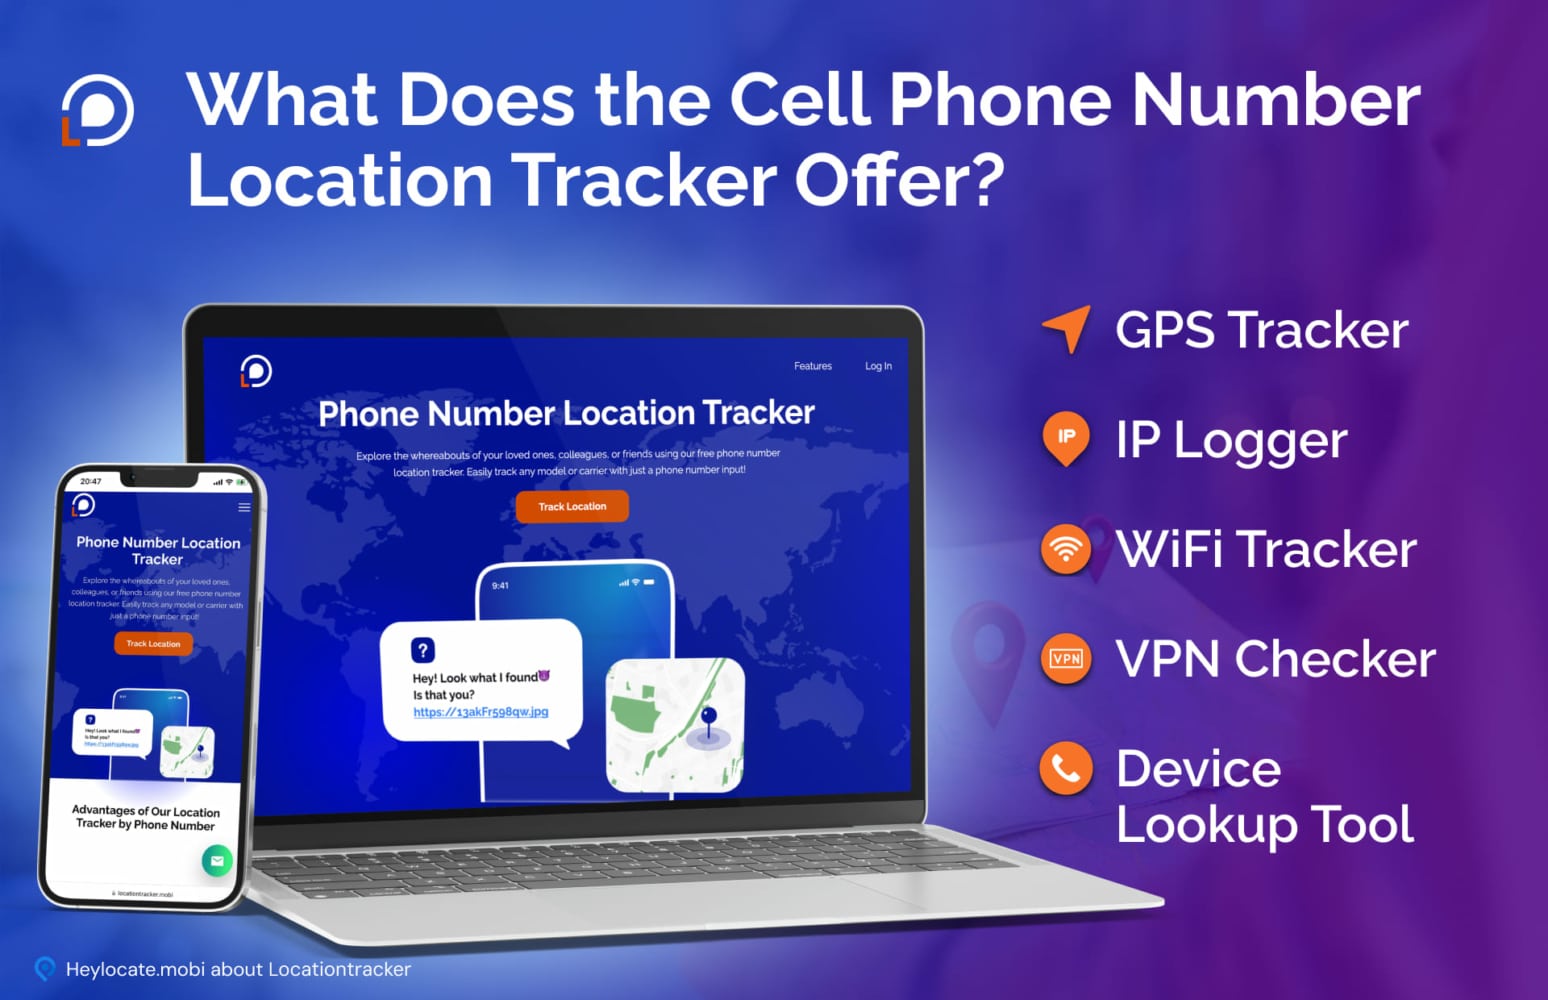 Promotional graphic for a cell phone number location tracker service, featuring a laptop and smartphones displaying the app interface. The graphic lists features such as GPS Tracker, IP Logger, WiFi Tracker, VPN Checker, and Device Lookup Tool.